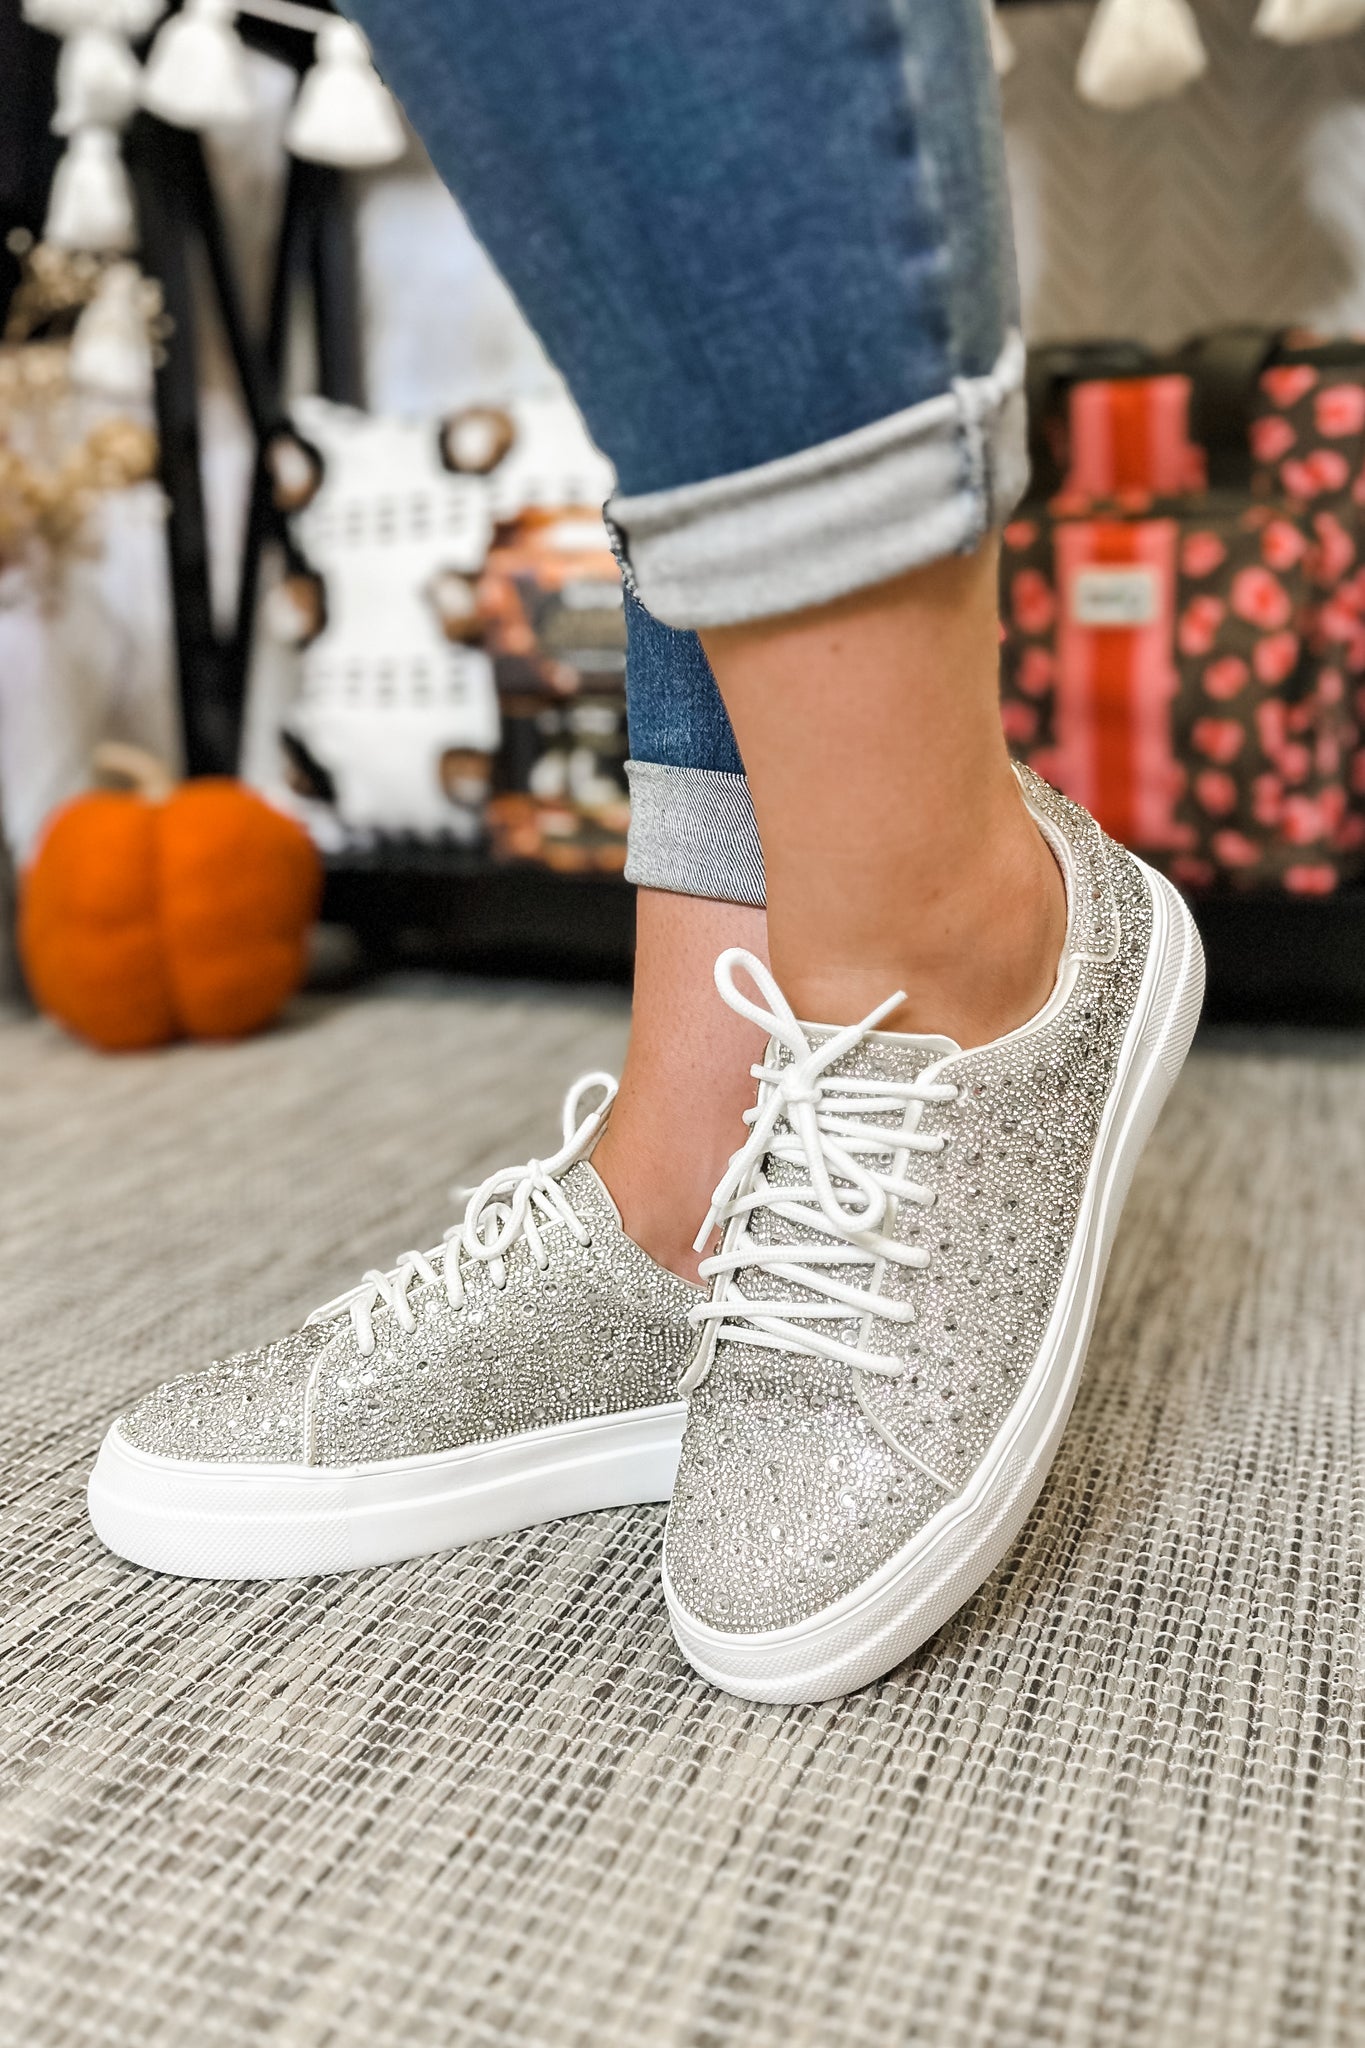 Corky's Bedazzled Clear Rhinestone Sneakers